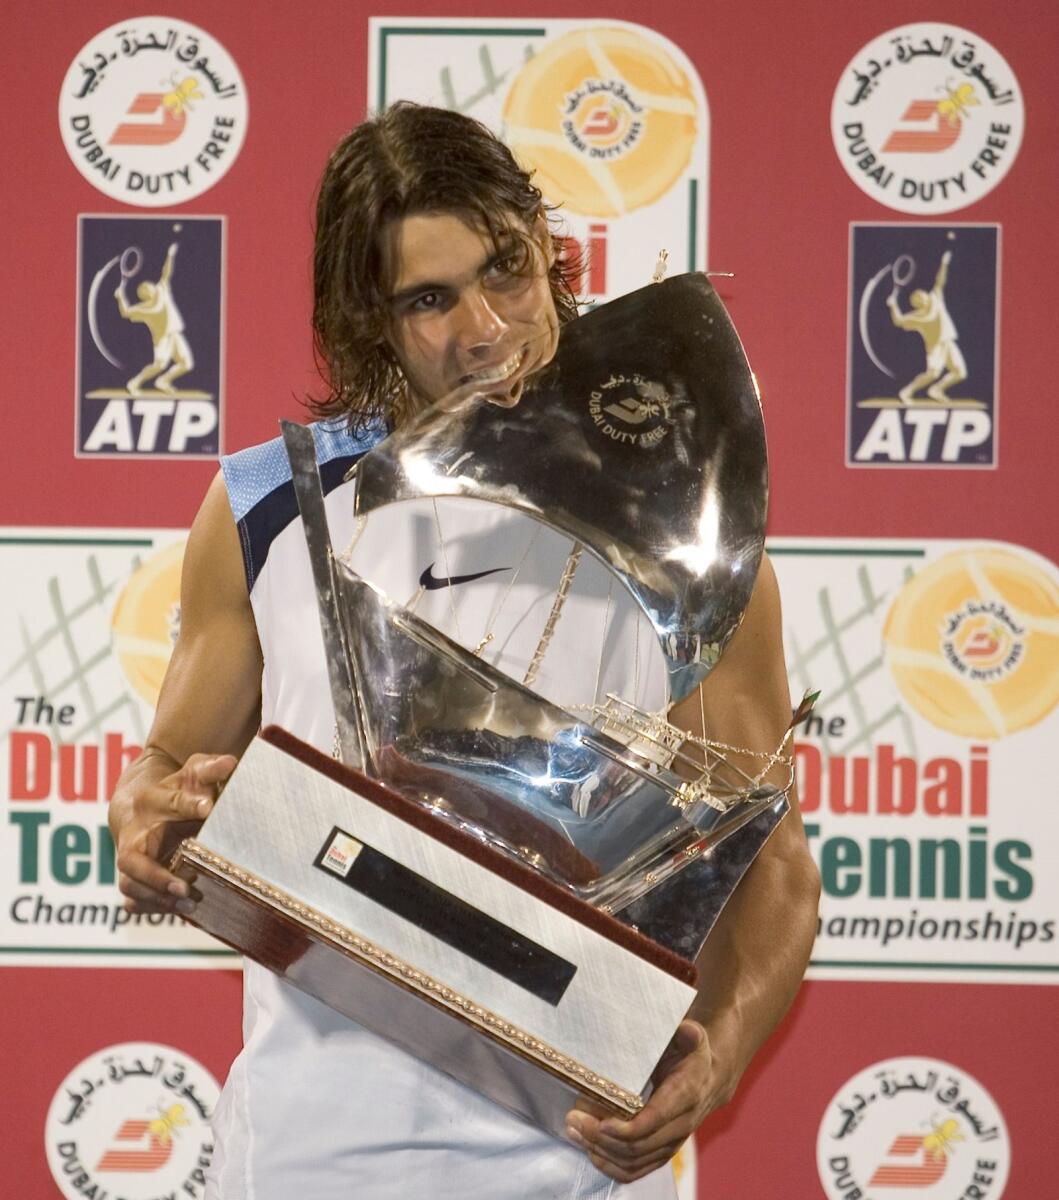 Rafael Nadal celebrates with the trophy after winning the Dubai tournament in 2006. — KT file